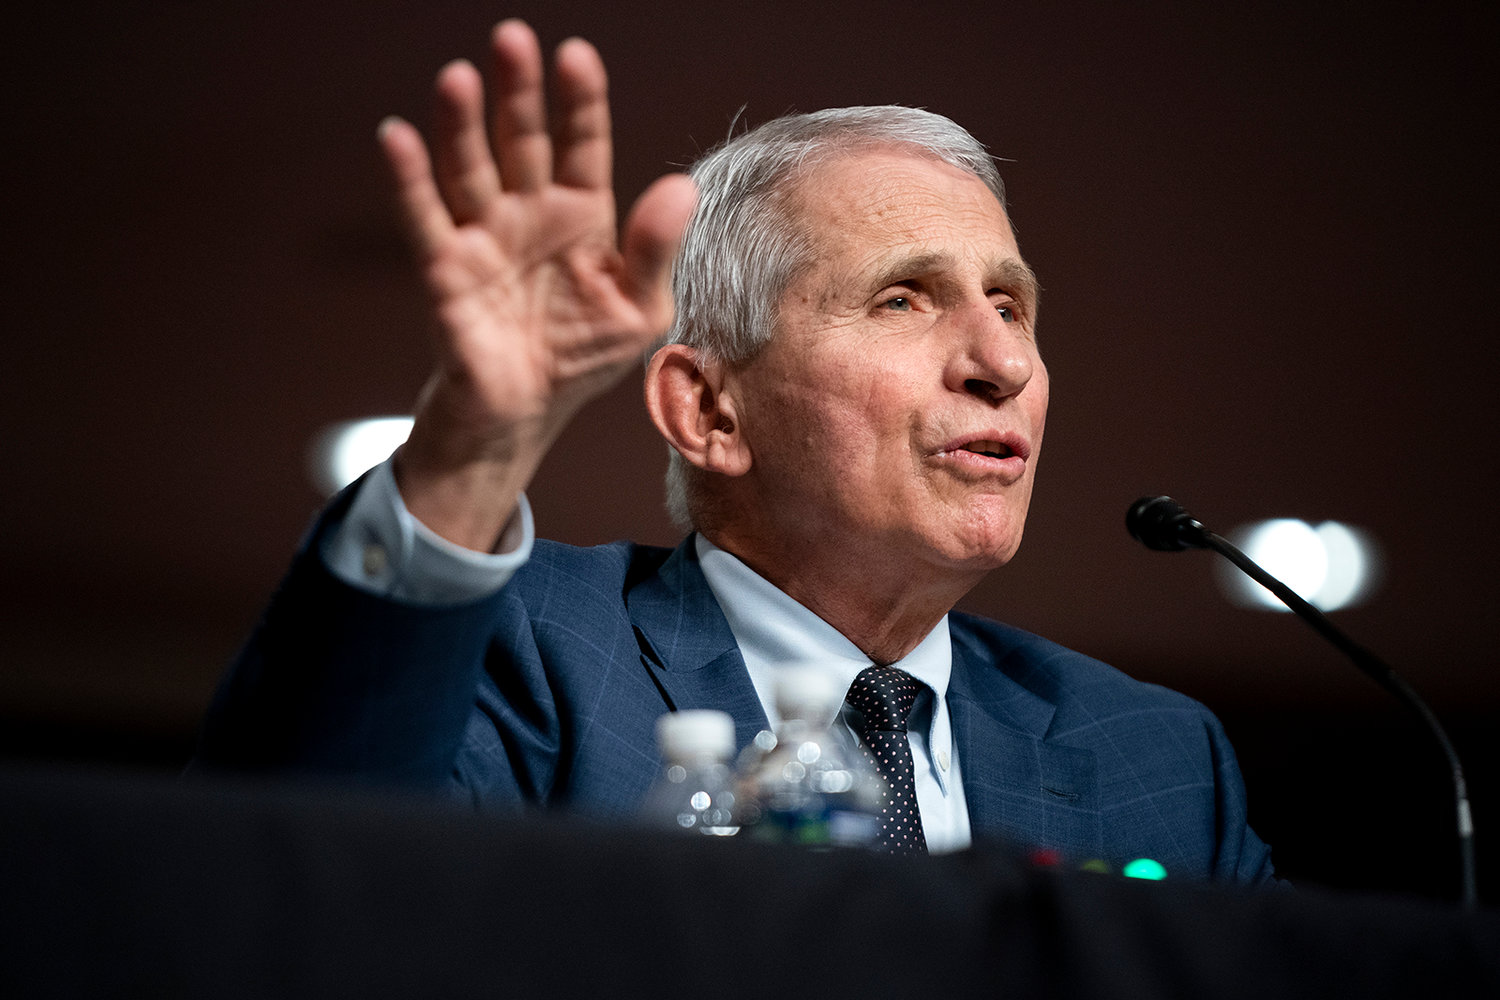 Dr. Anthony Fauci, White House chief medical adviser and director of the NIAID, testifies at a Senate Health, Education, Labor, and Pensions Committee hearing on Capitol Hill on Jan. 11, 2022, in Washington, D.C. (Greg Nash/Pool/Getty Images/TNS)